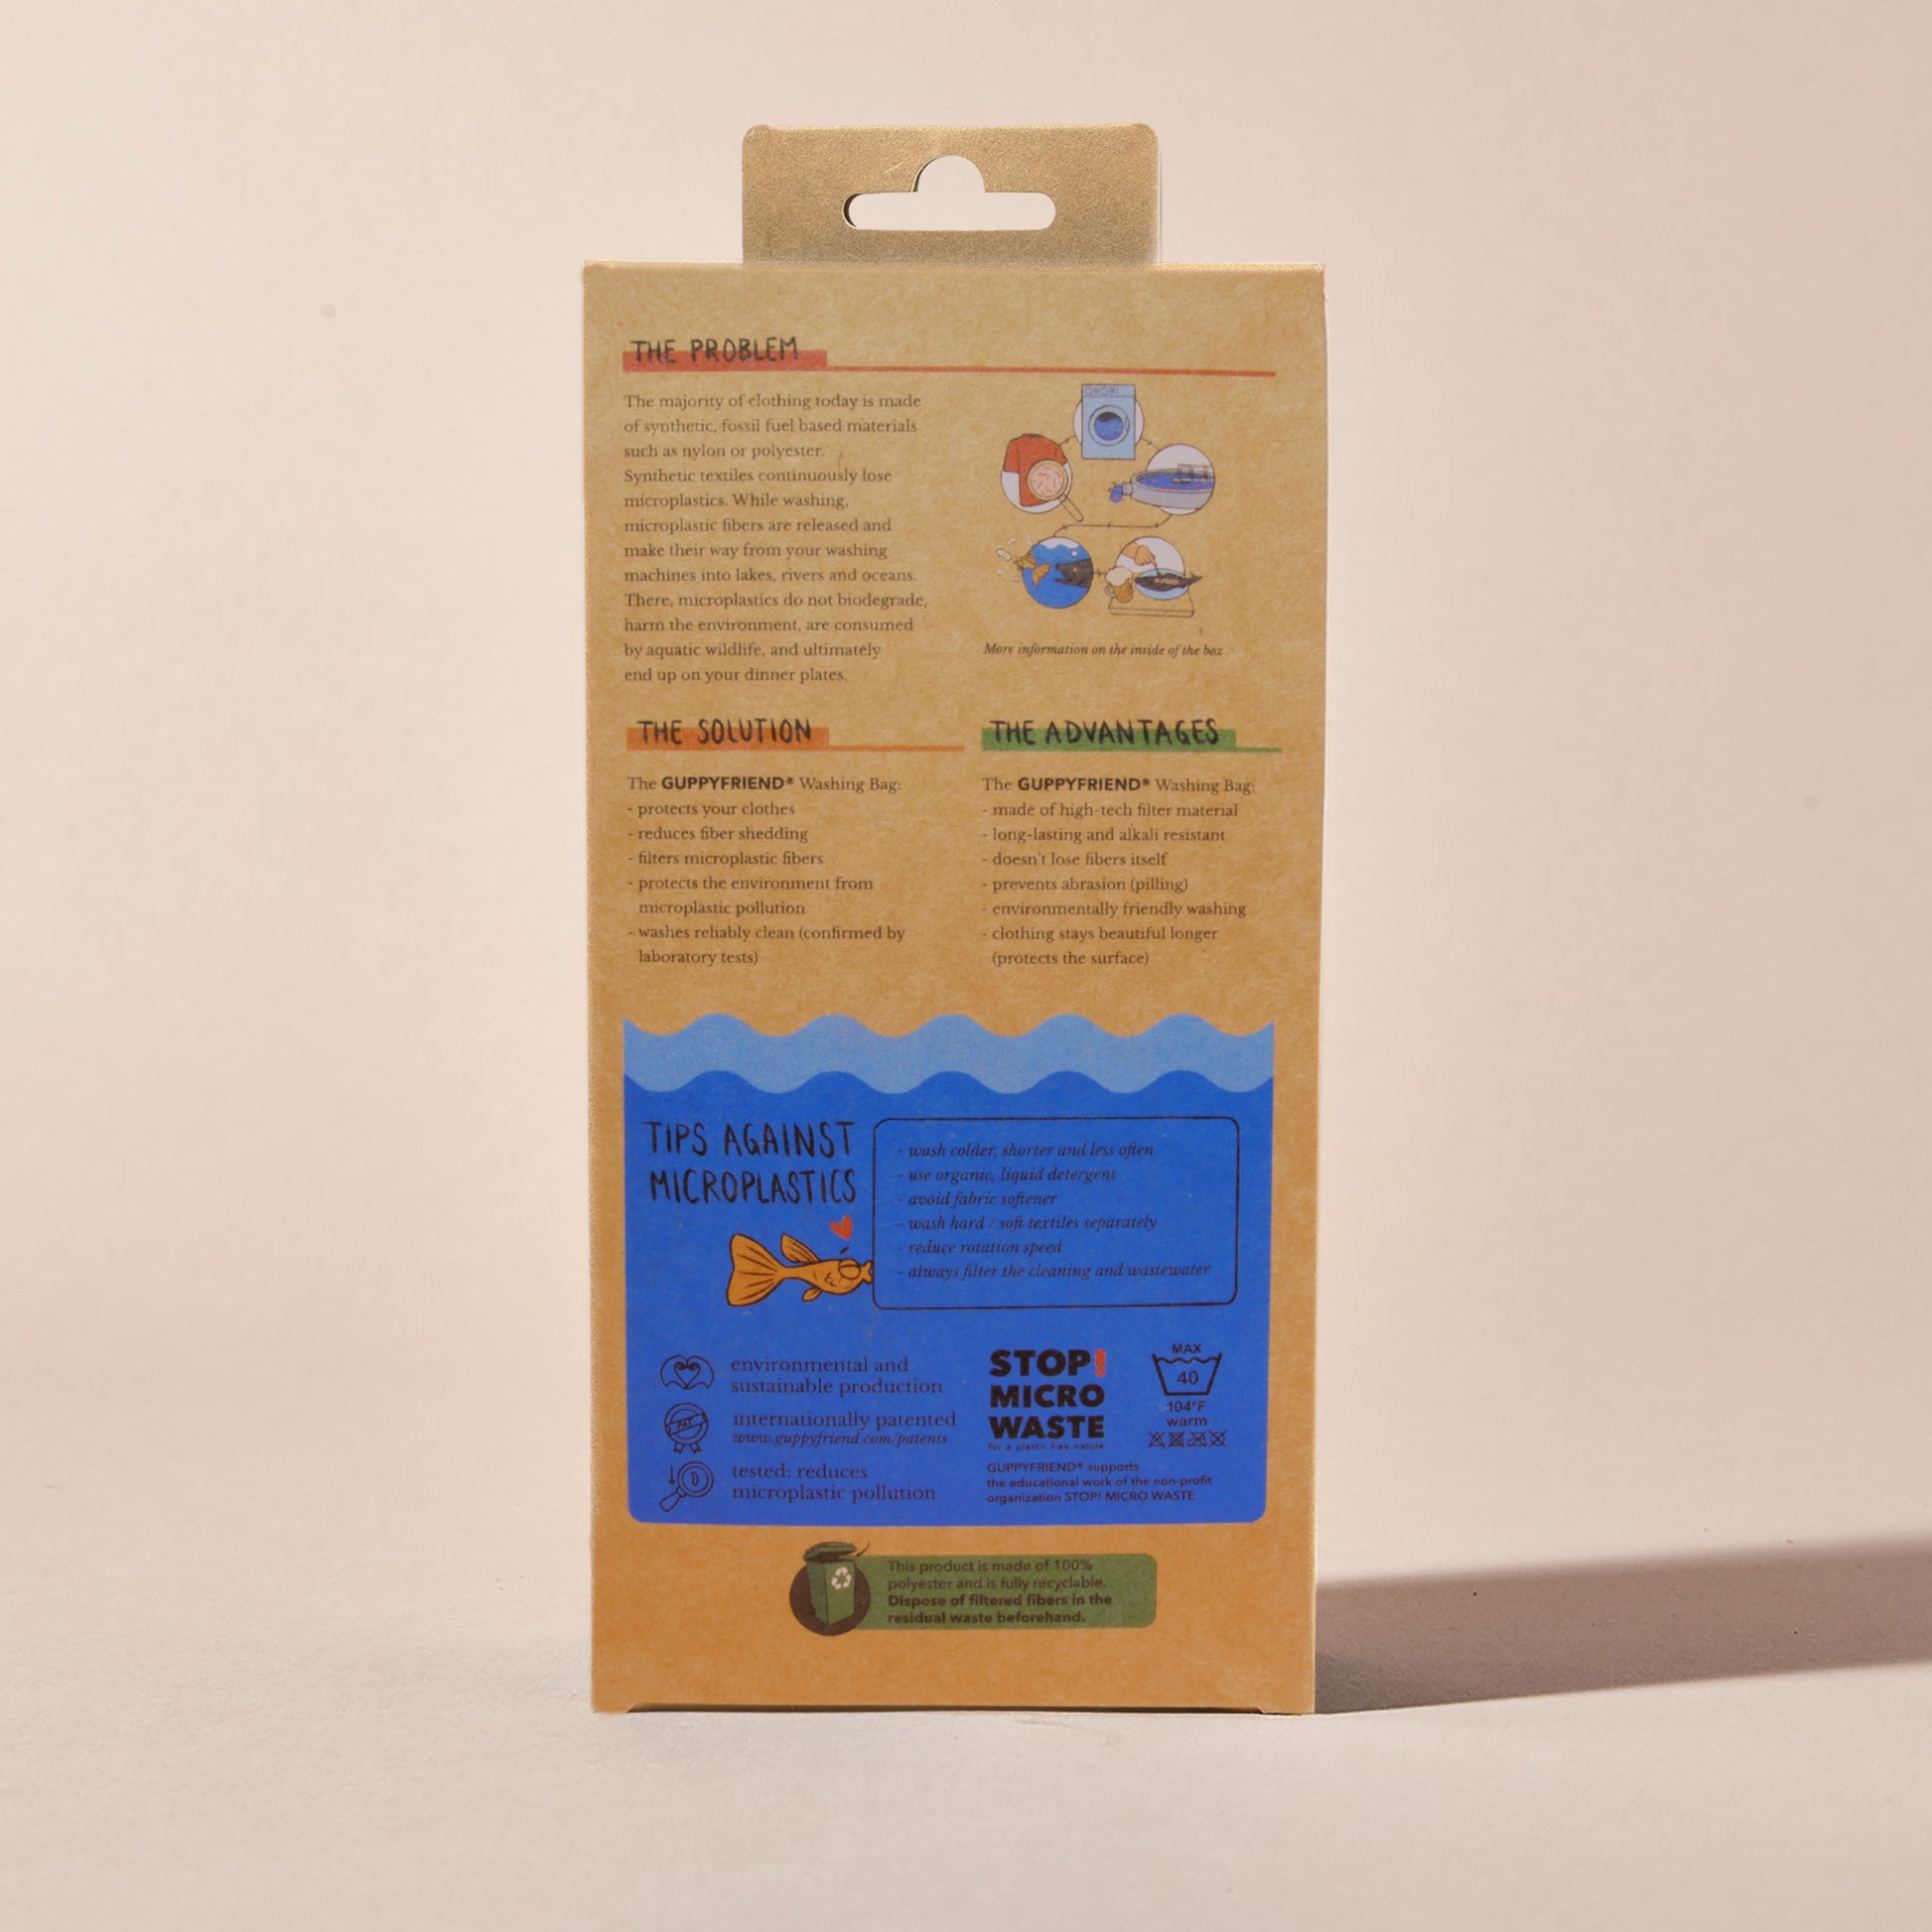 The back of Guppyfriend packaging, which outlines the microfiber pollution problem and the advantages of using a microfiber washing bag to reduce ocean plastic pollution